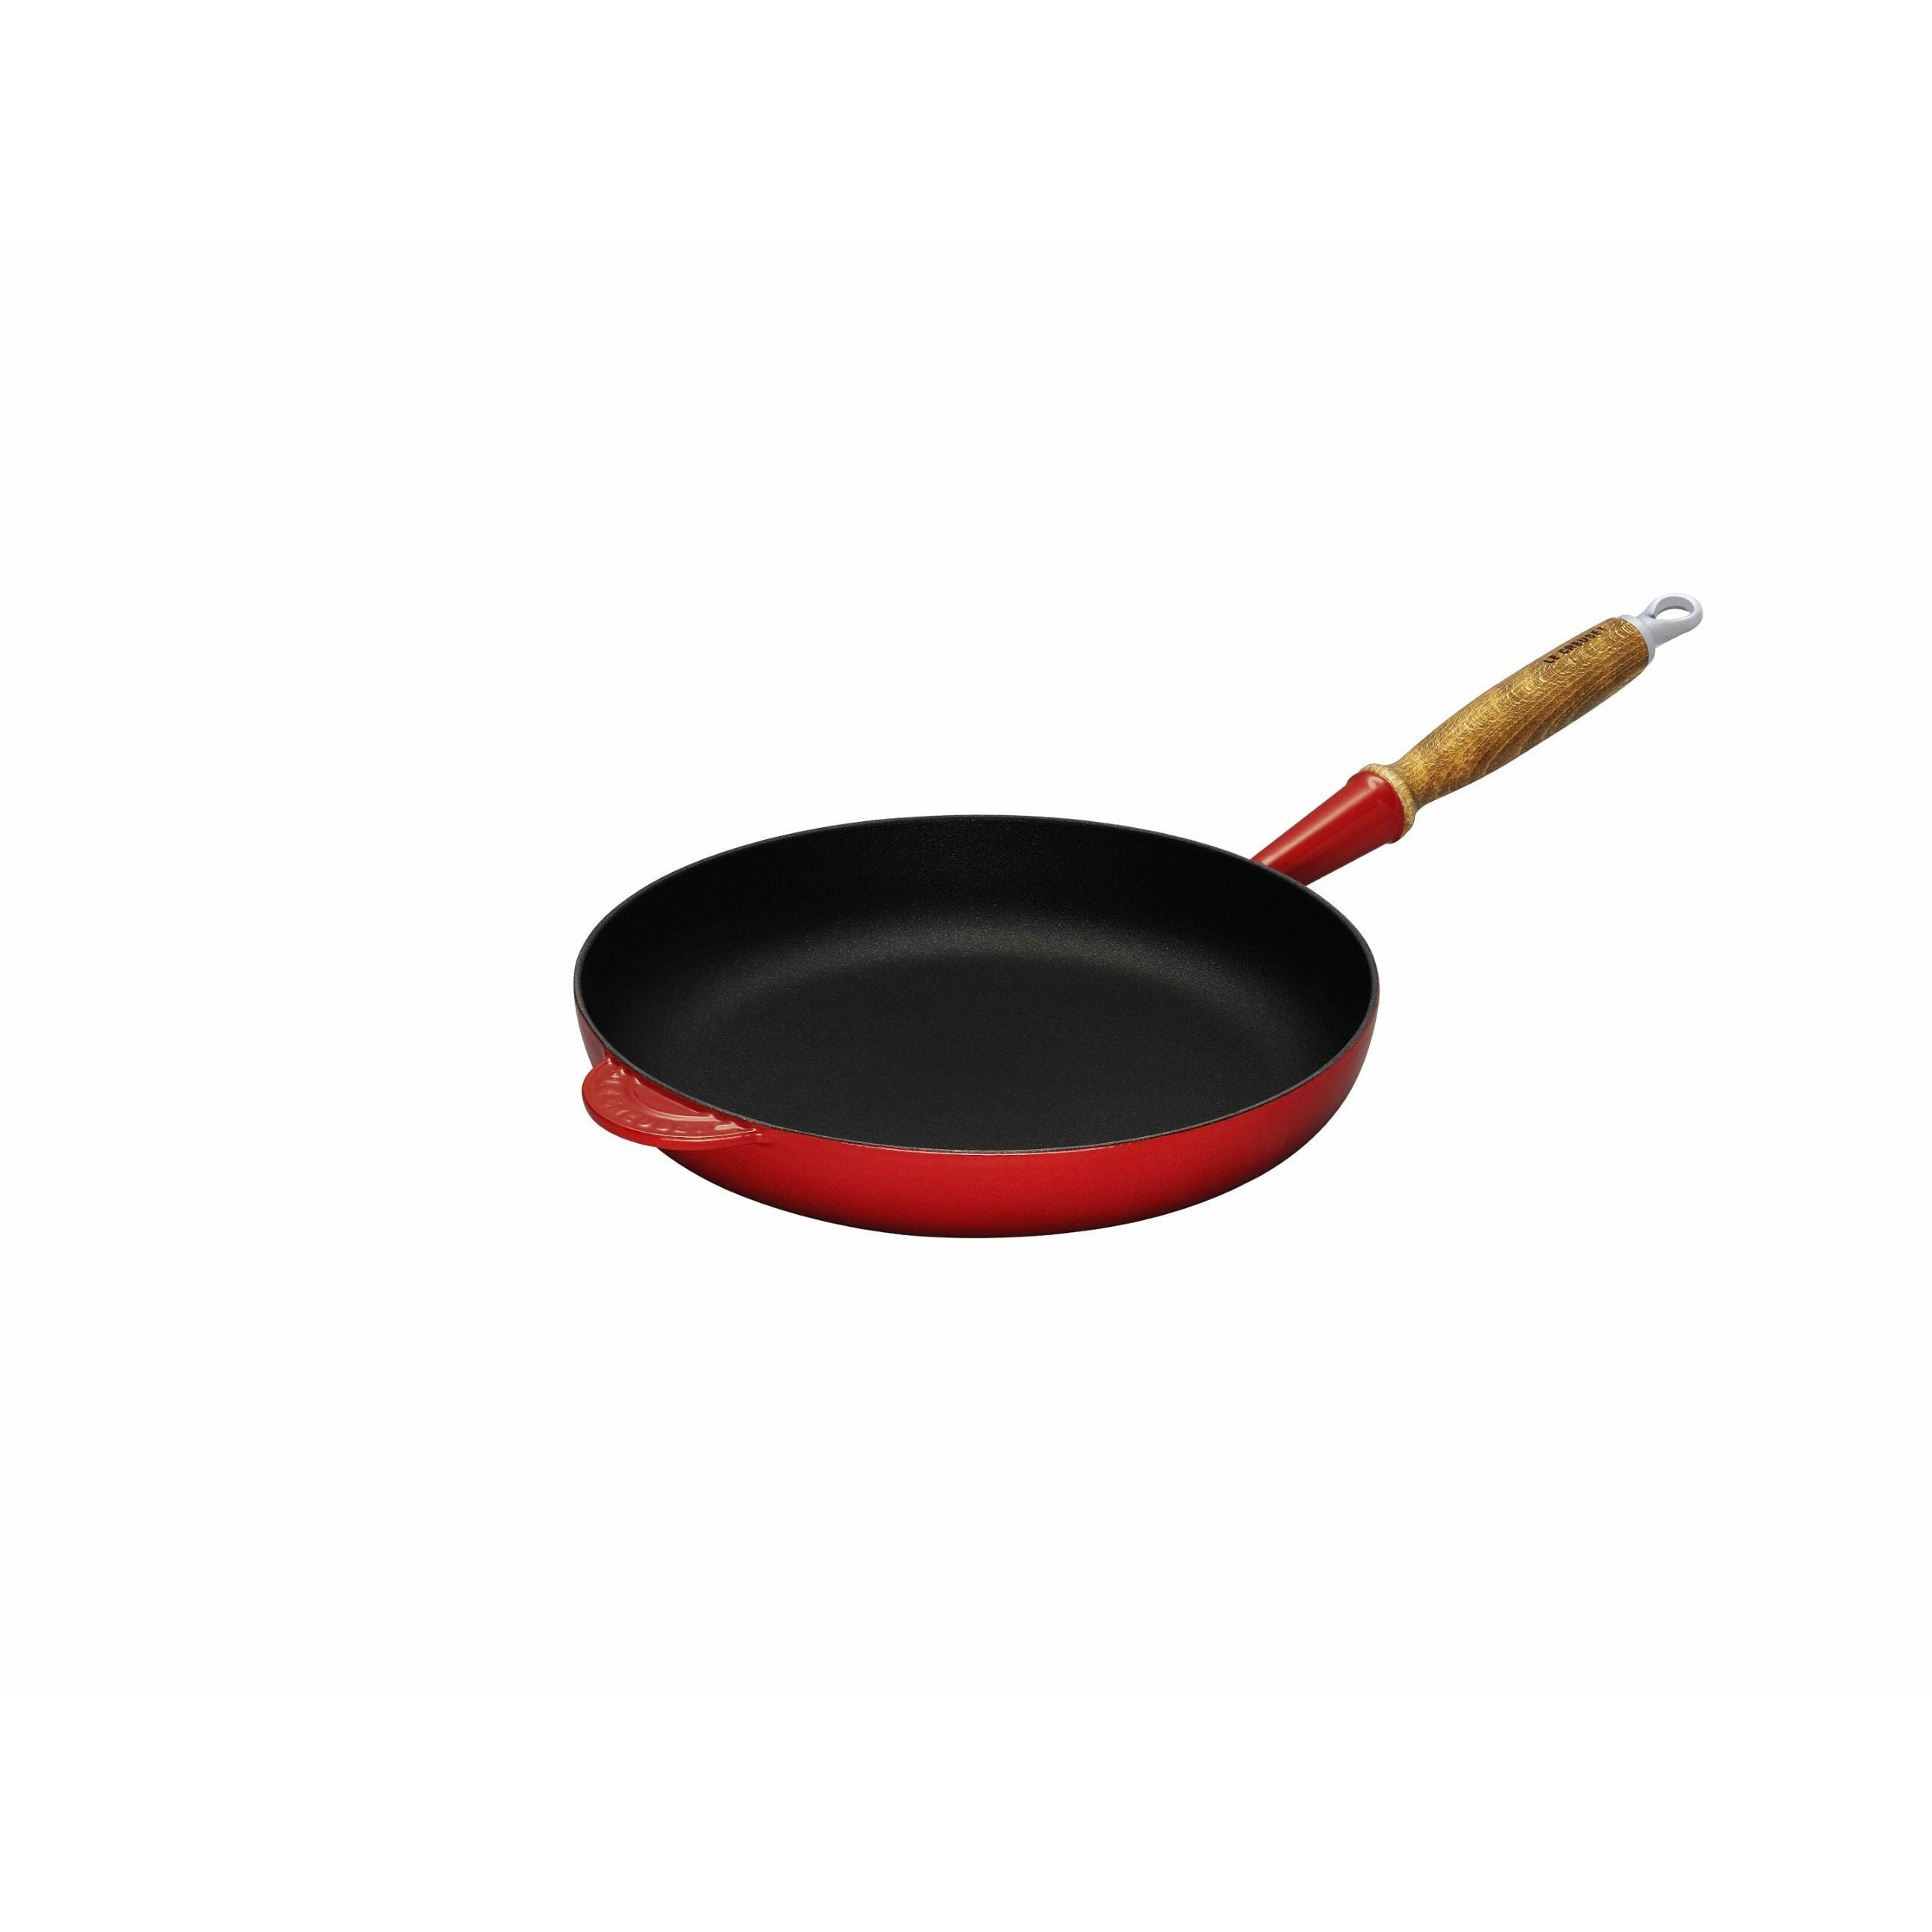 Le Creuset Tradition Frying Pan With Wooden Handle 24 Cm, Cherry Red